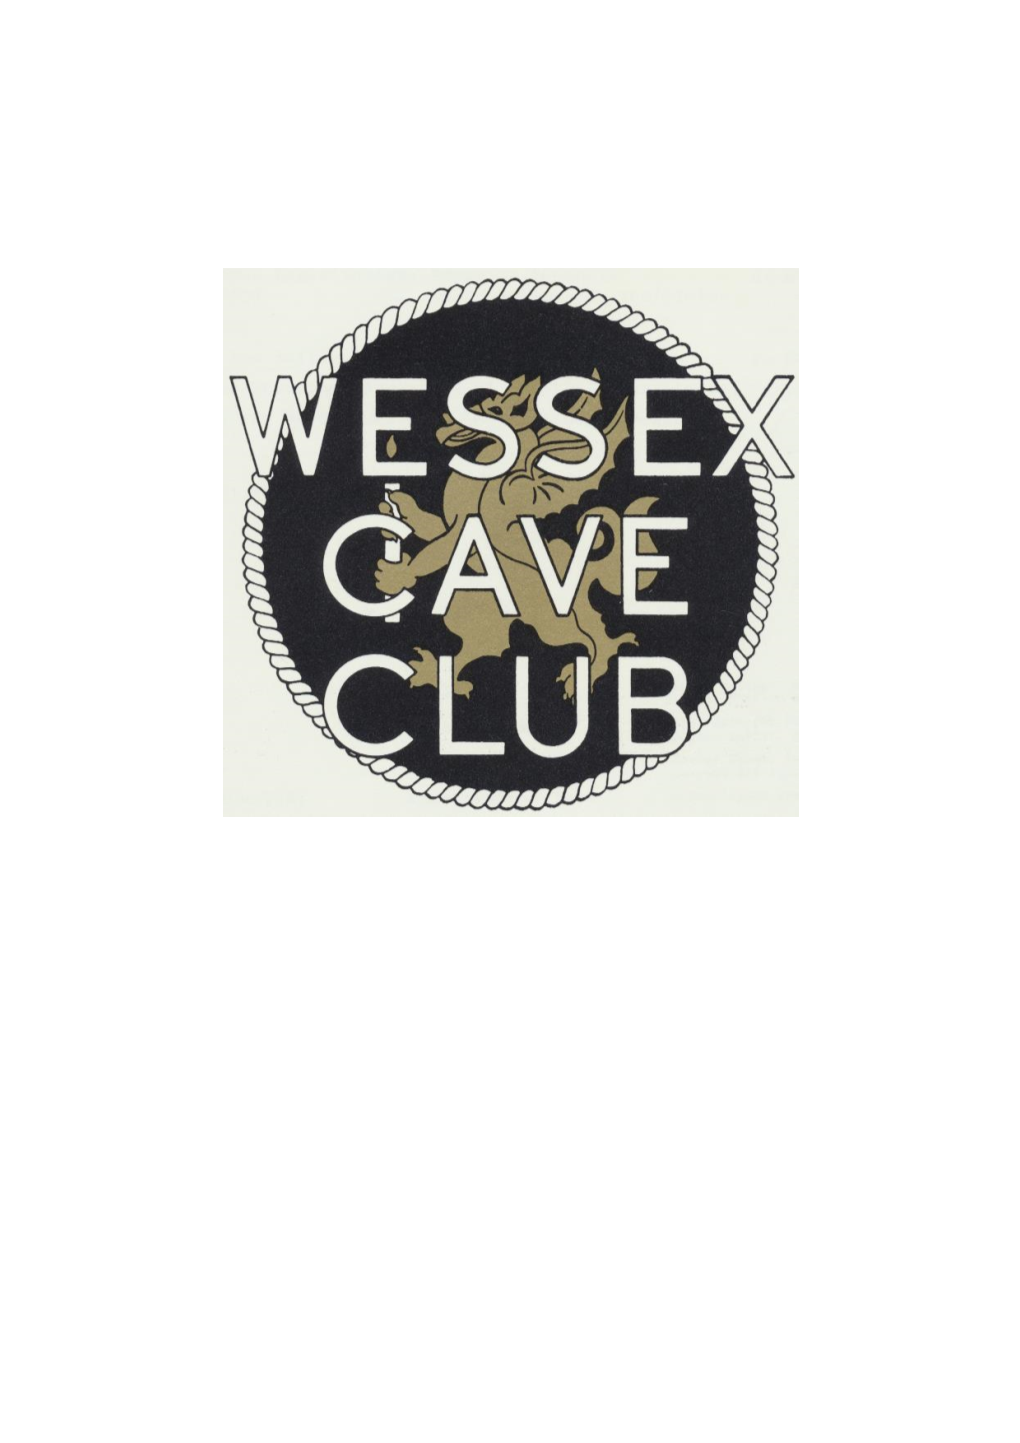 The Wessex Cave Club Journal Volume 20 (Number 220) March 1989